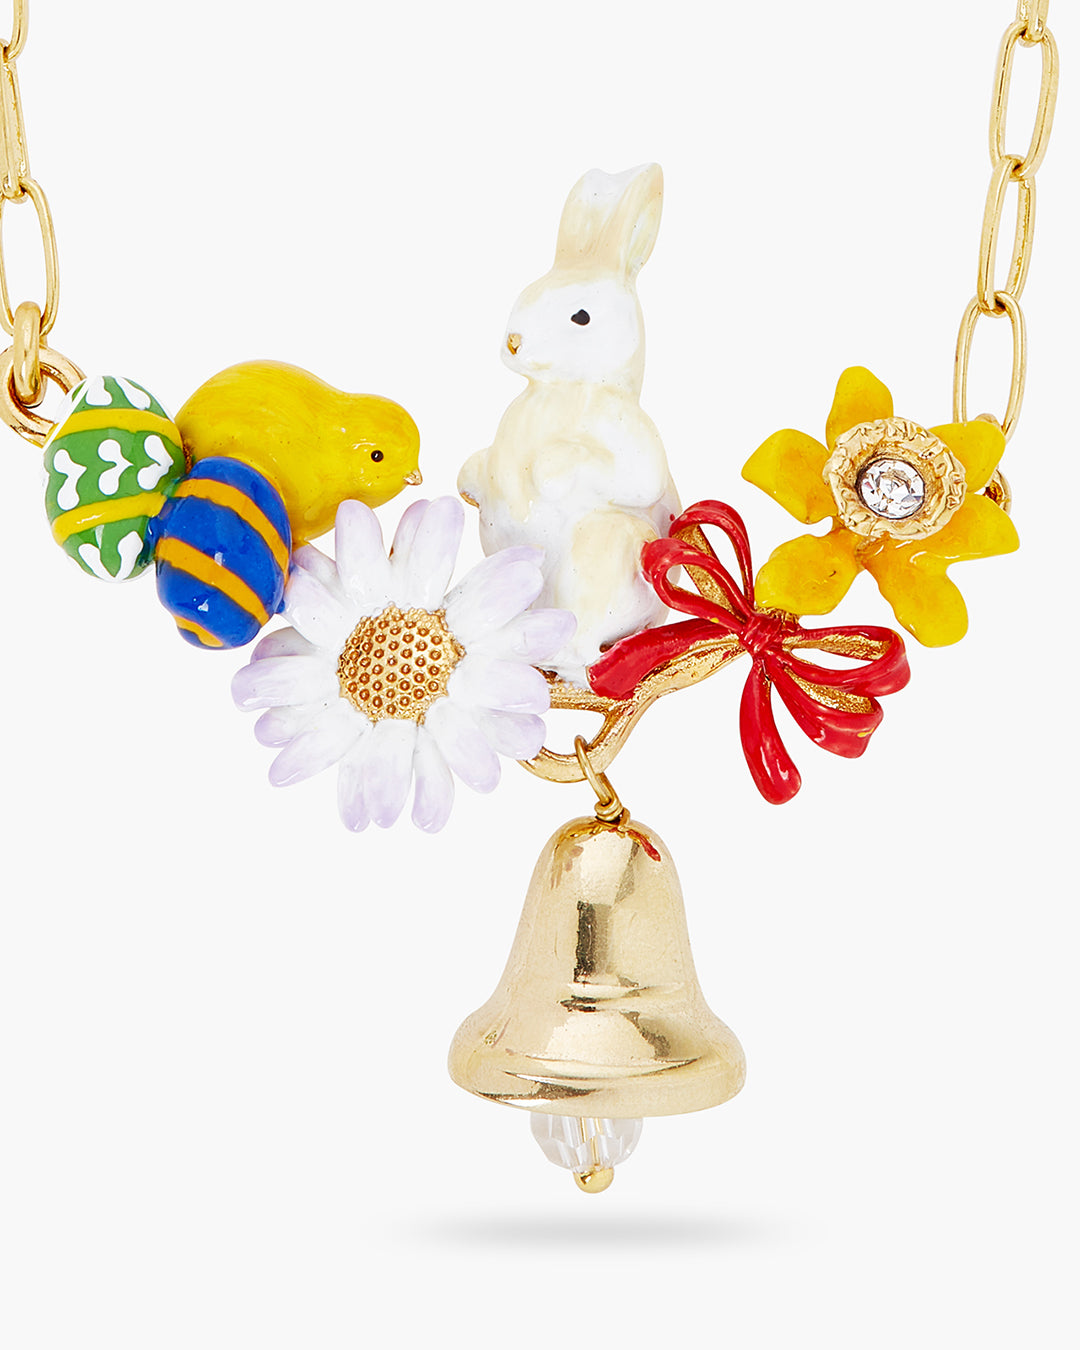 Easter Chick And Rabbit Thin Necklace | ARLA3011